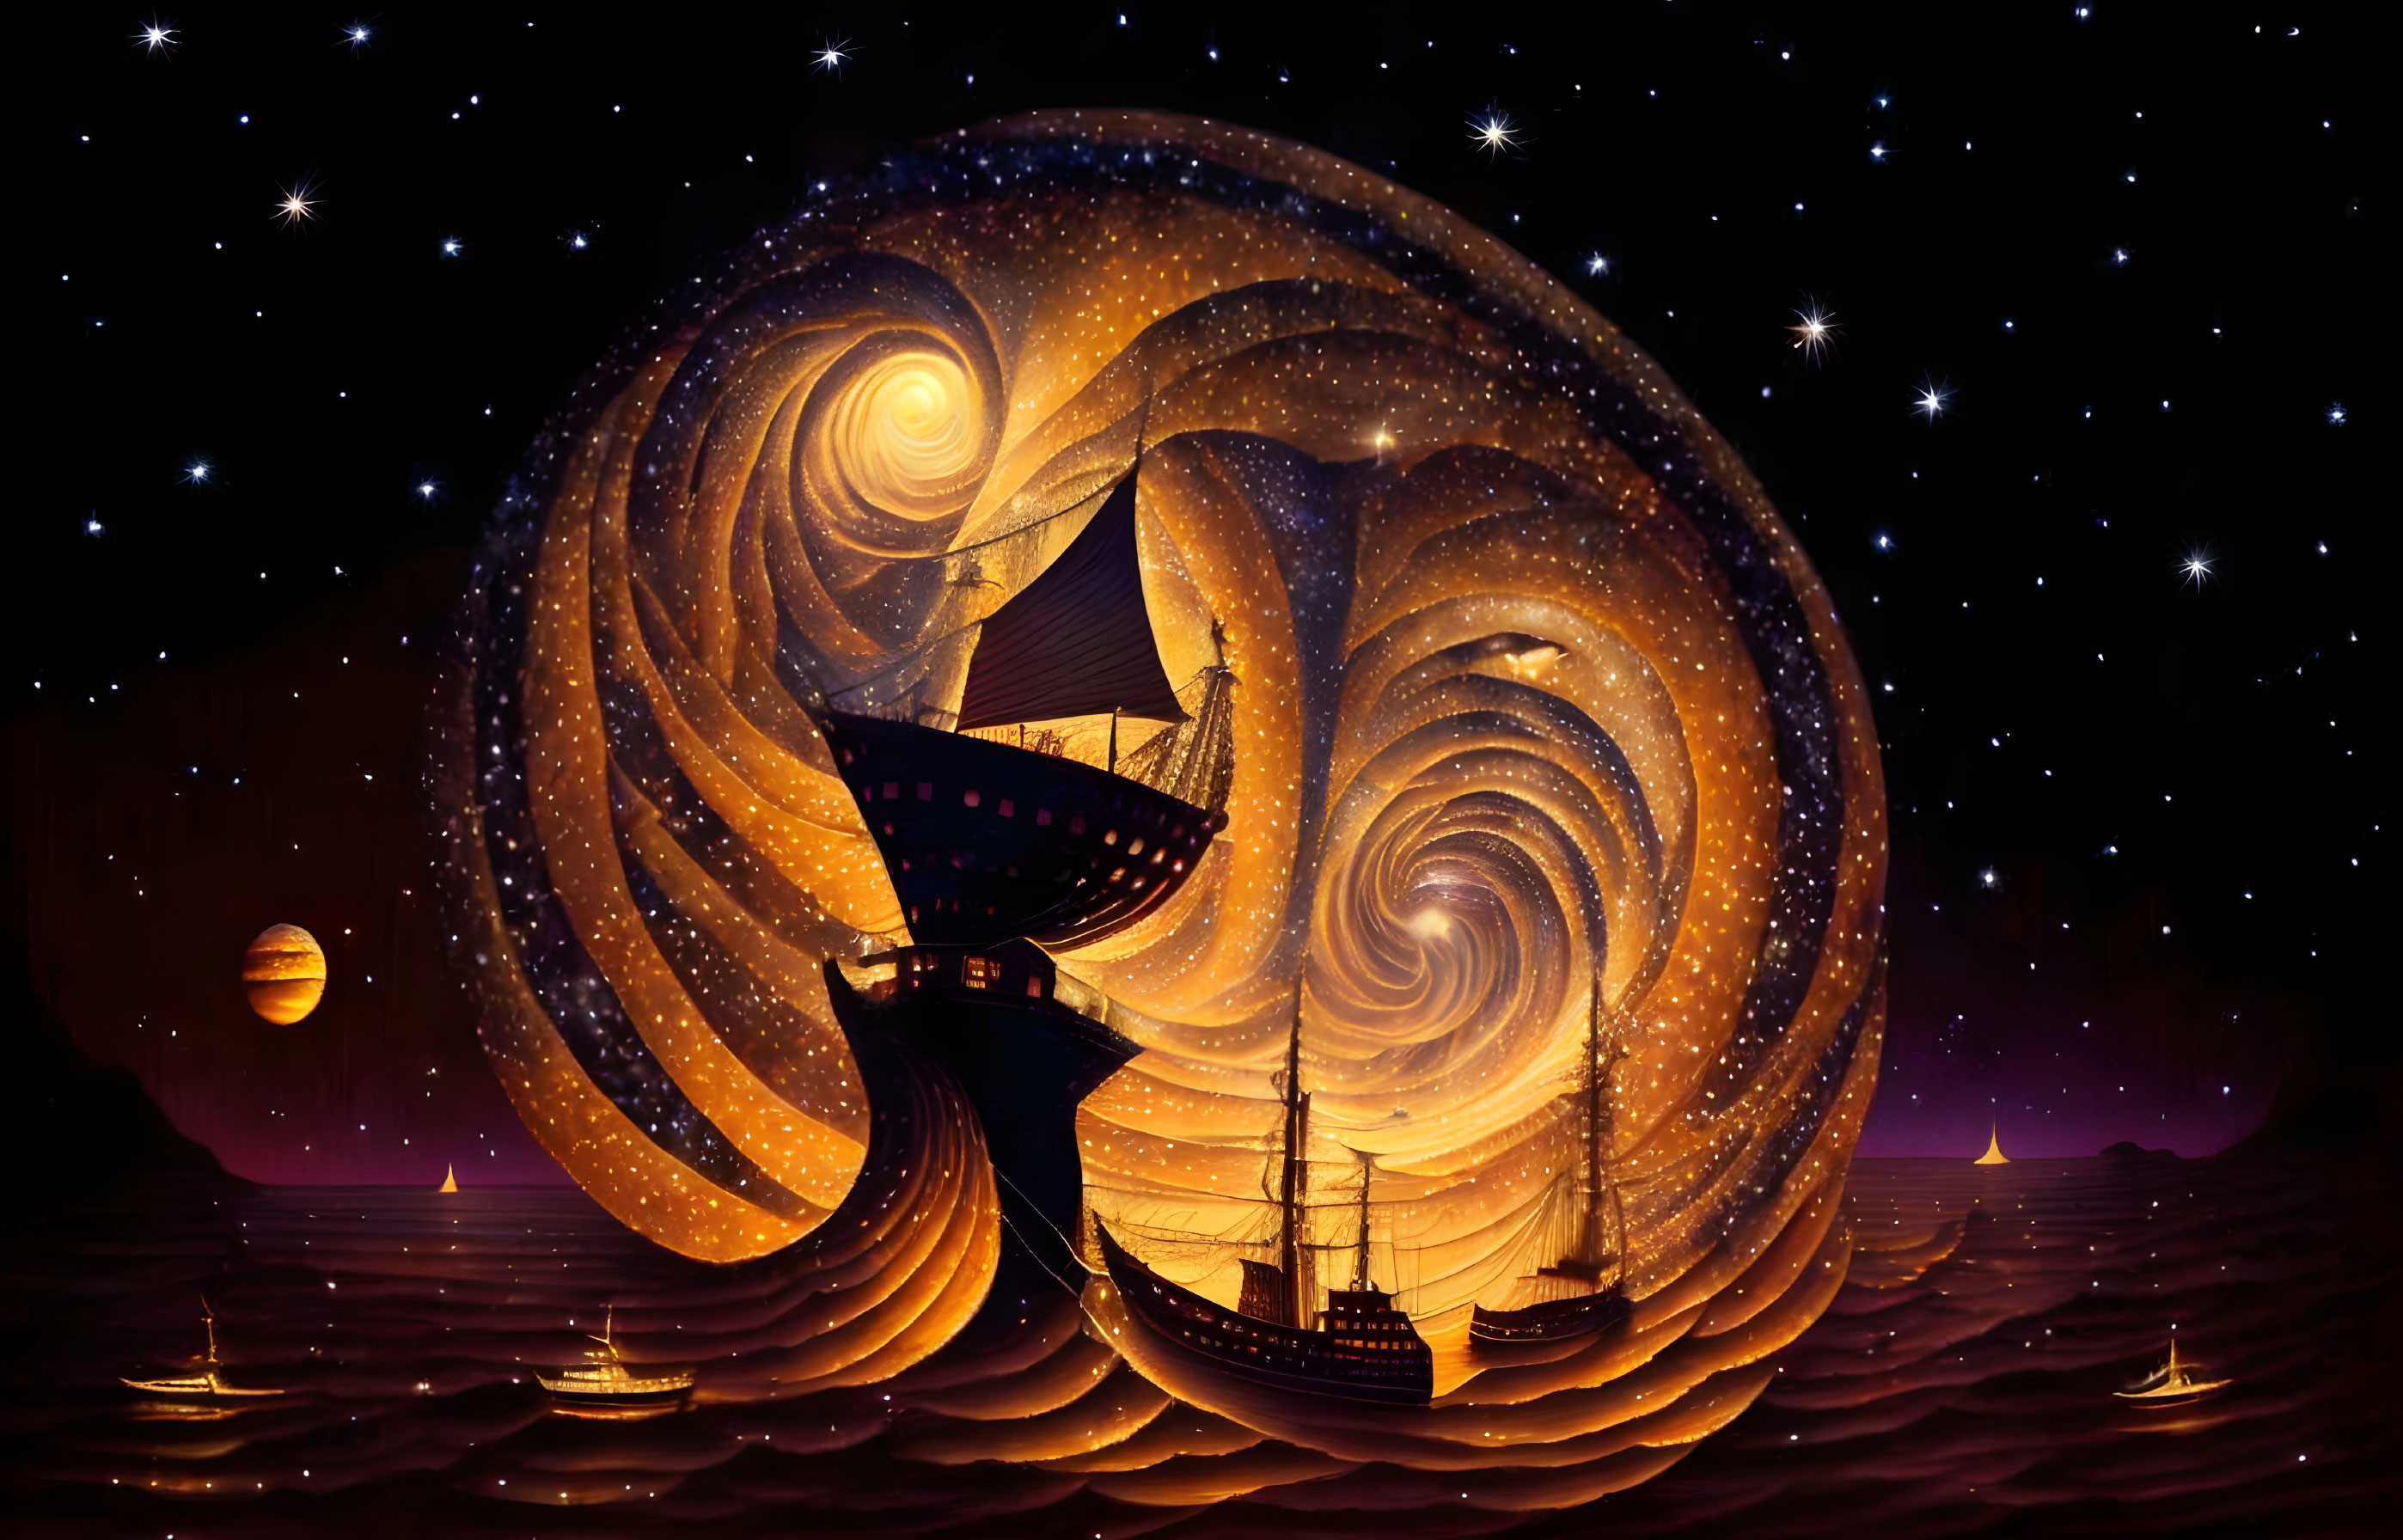 Surreal digital artwork of nighttime seascape with boats and star patterns